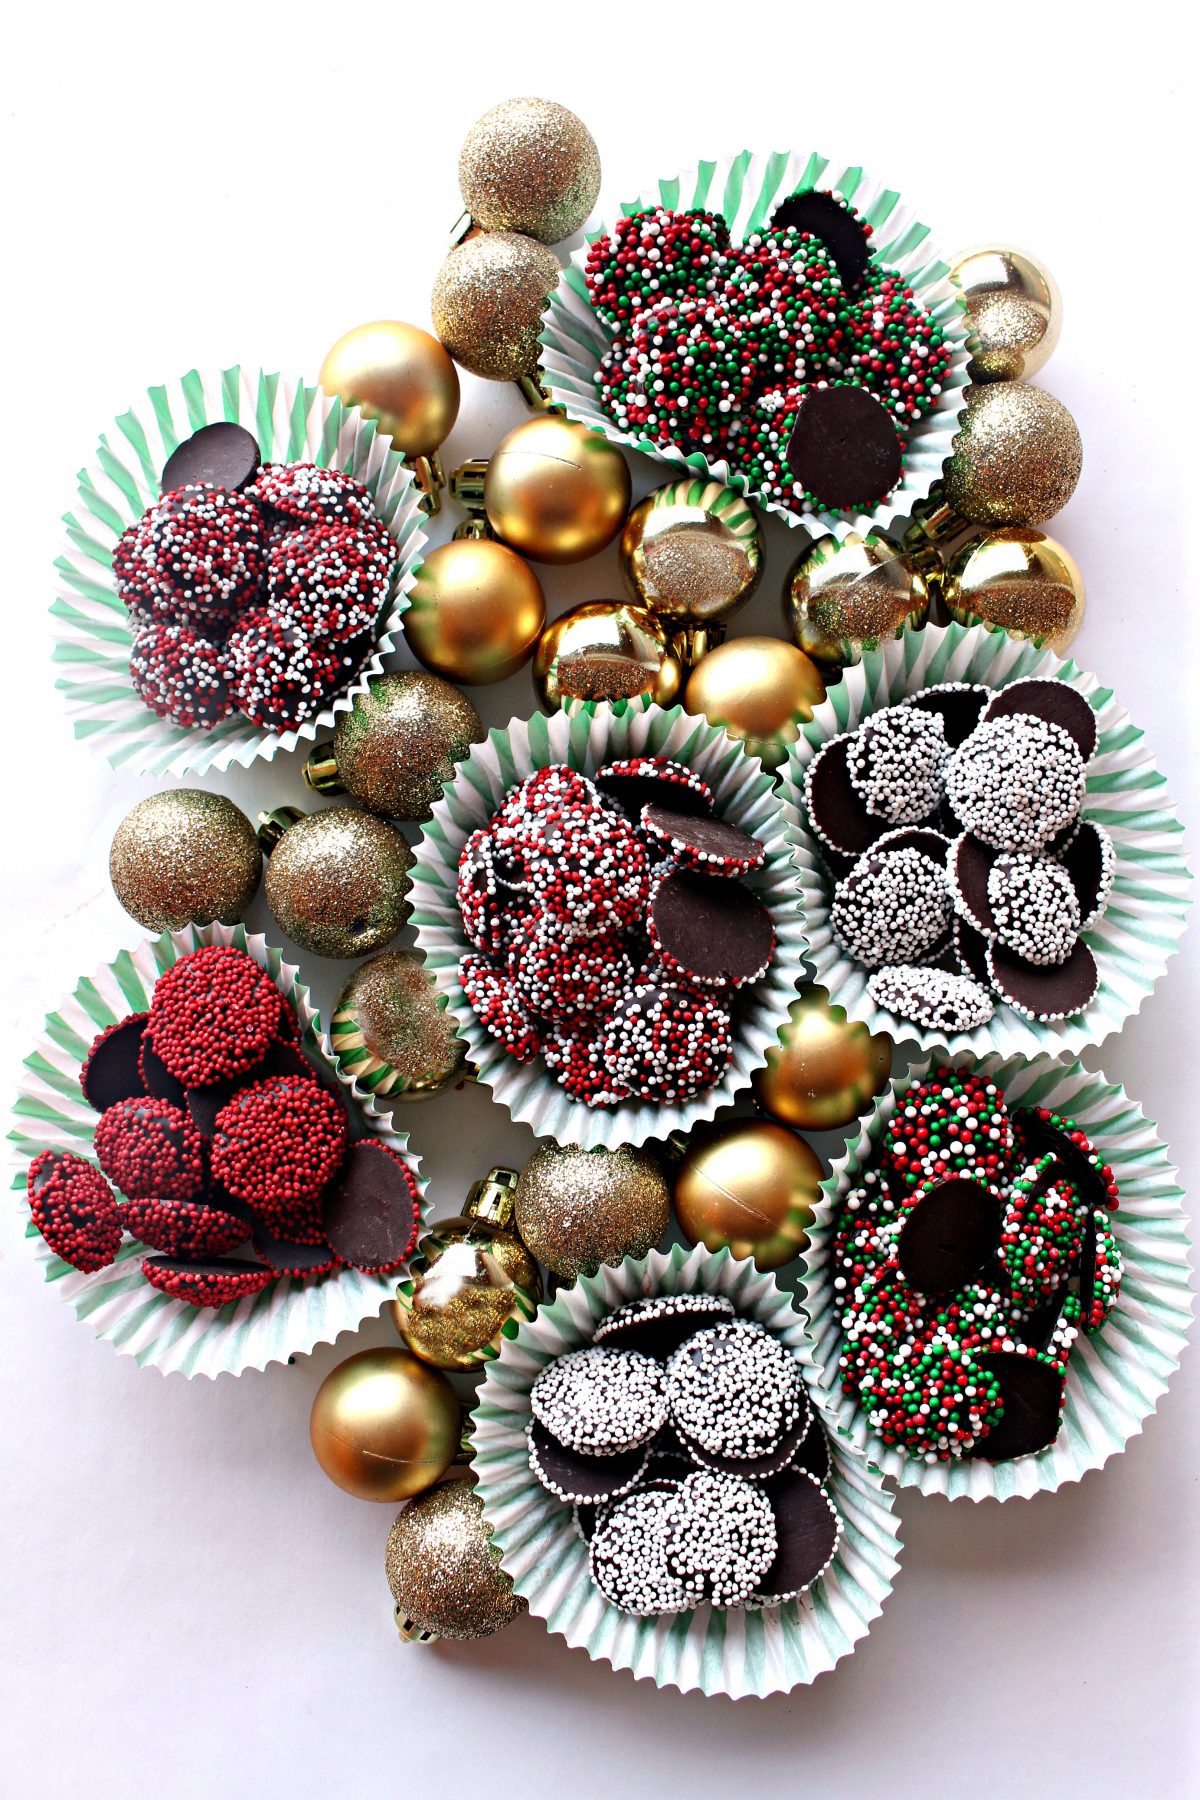 Gold ball ornaments and cups of Nonpareil chocolate candies coated in different colored sprinkles.